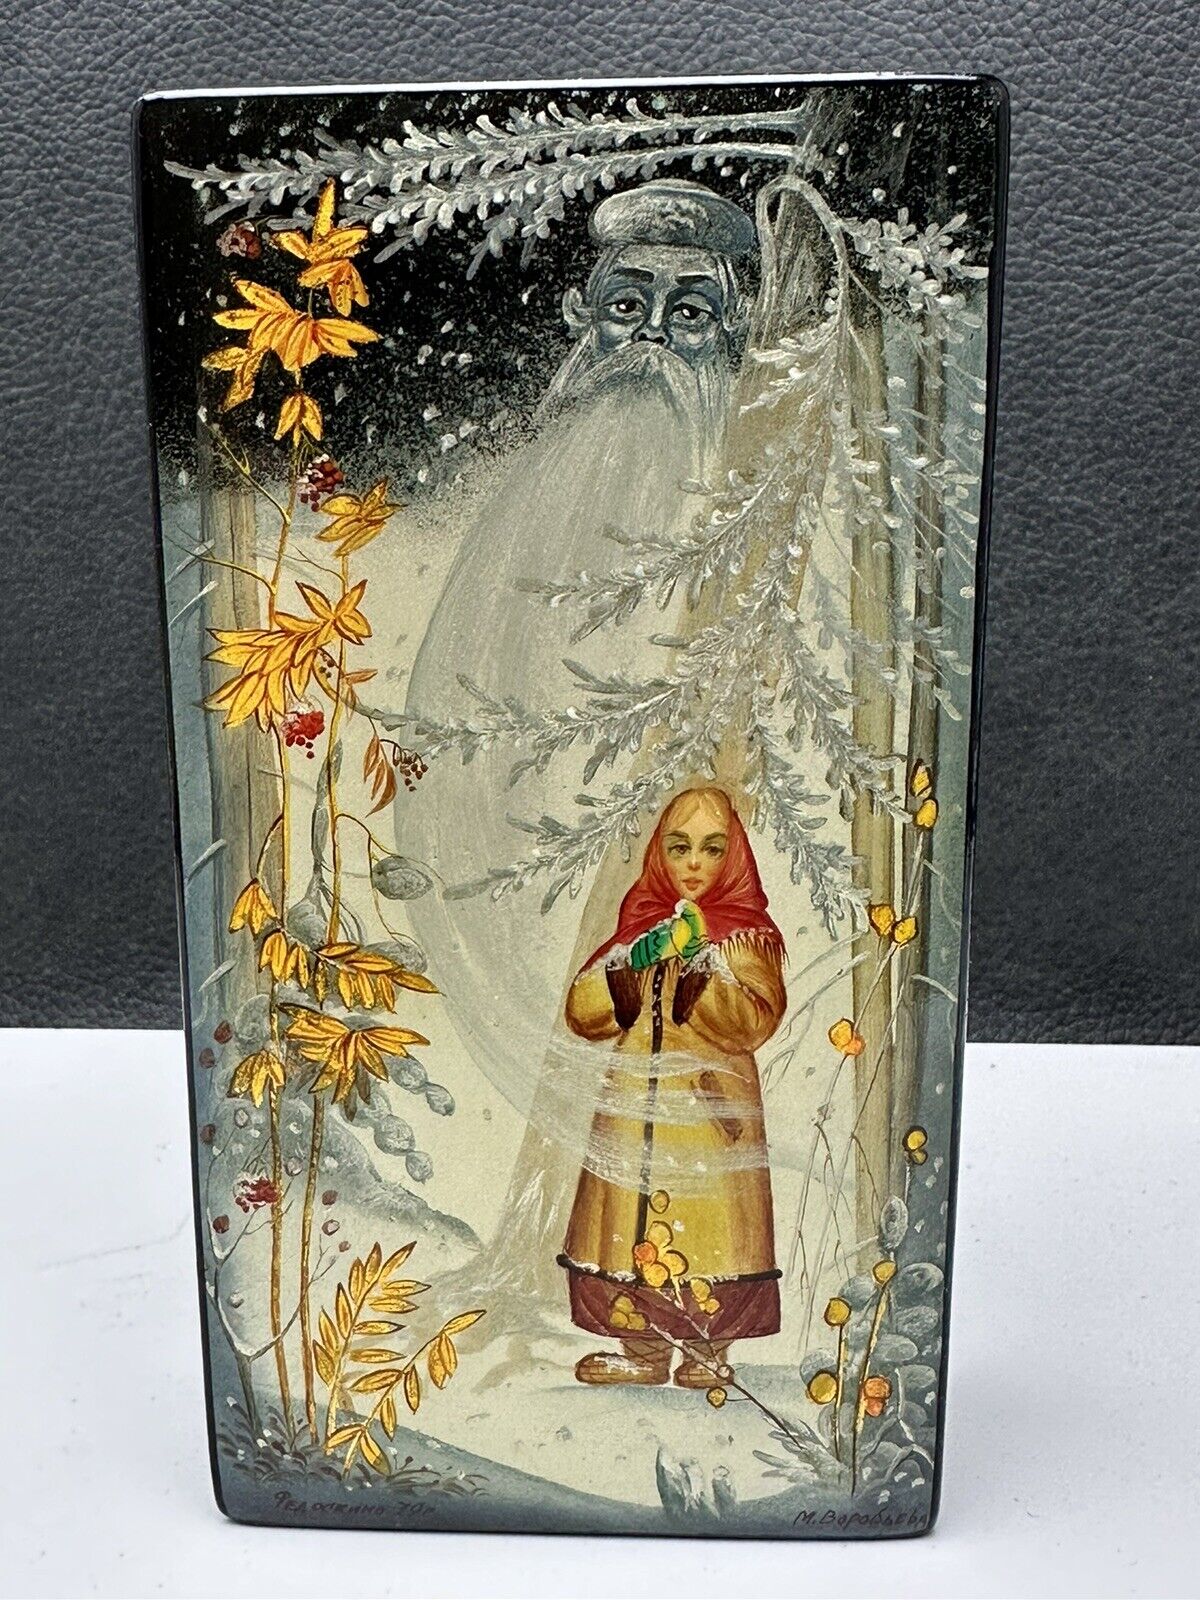 Fedoskino Hand Painted Russian Lacquer Box Girl Winter Forest Signed M Vorobyova